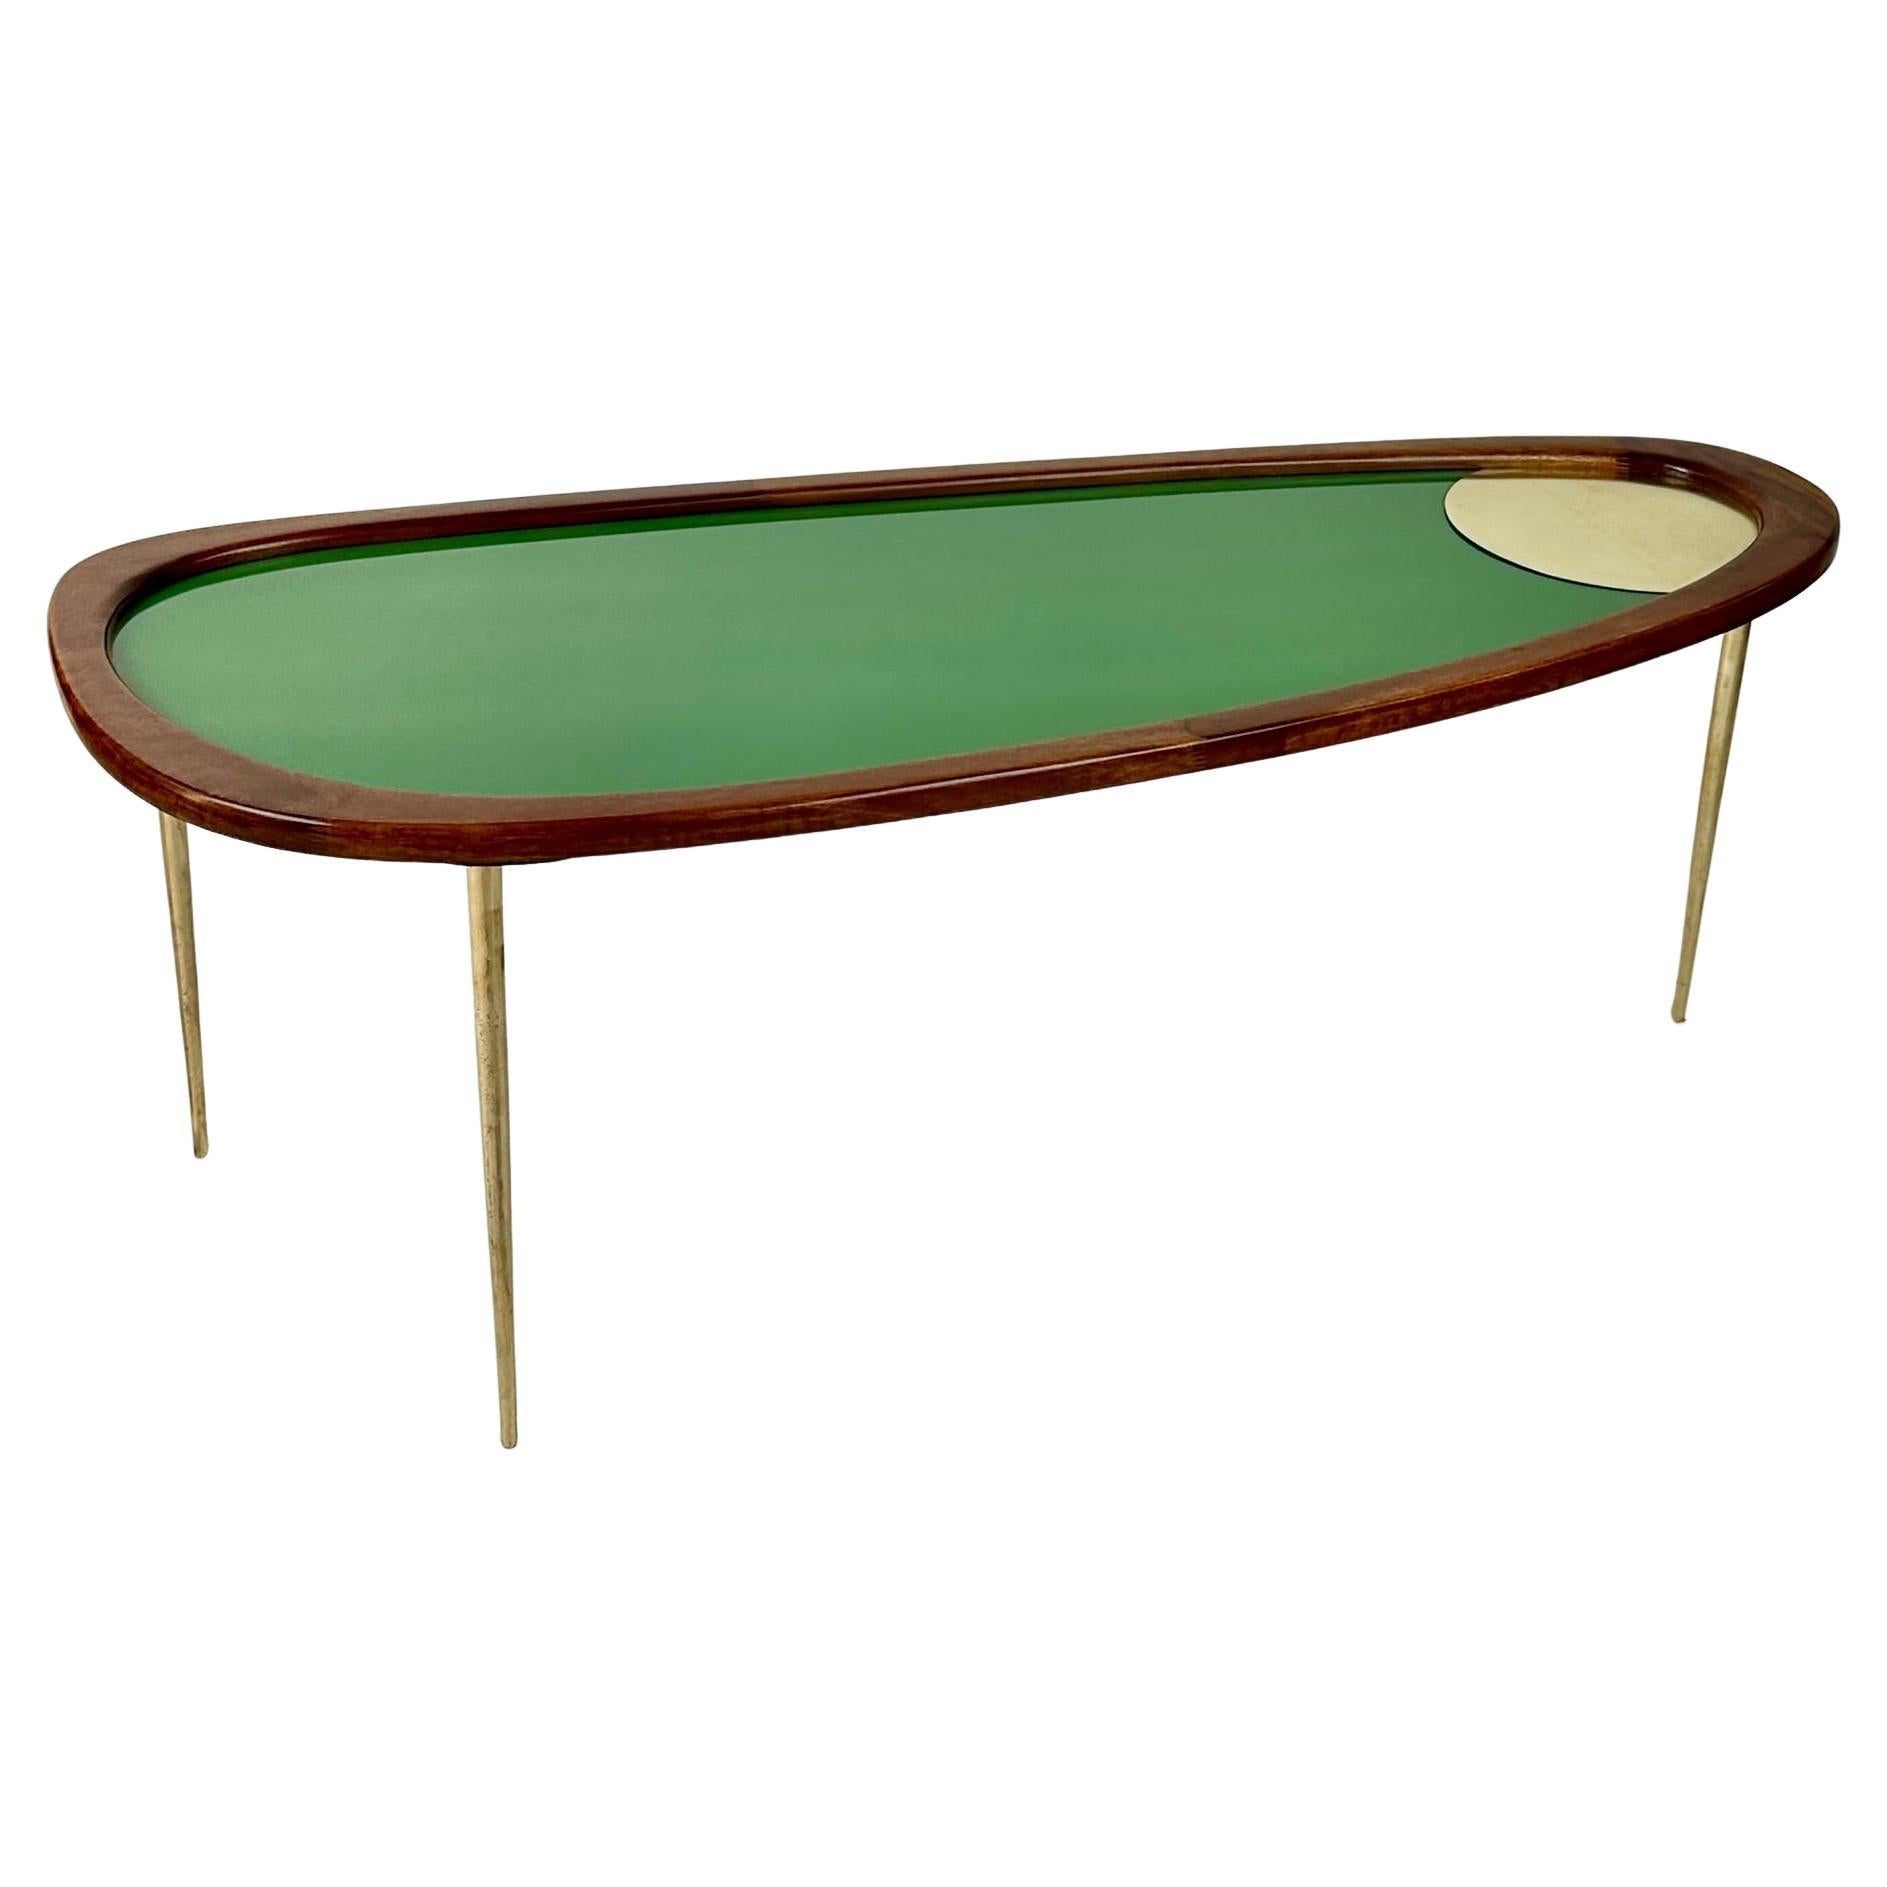 Late 20th Century Wood, Brass & Green Opaline Glass Amorphous Shape Coffee Table For Sale